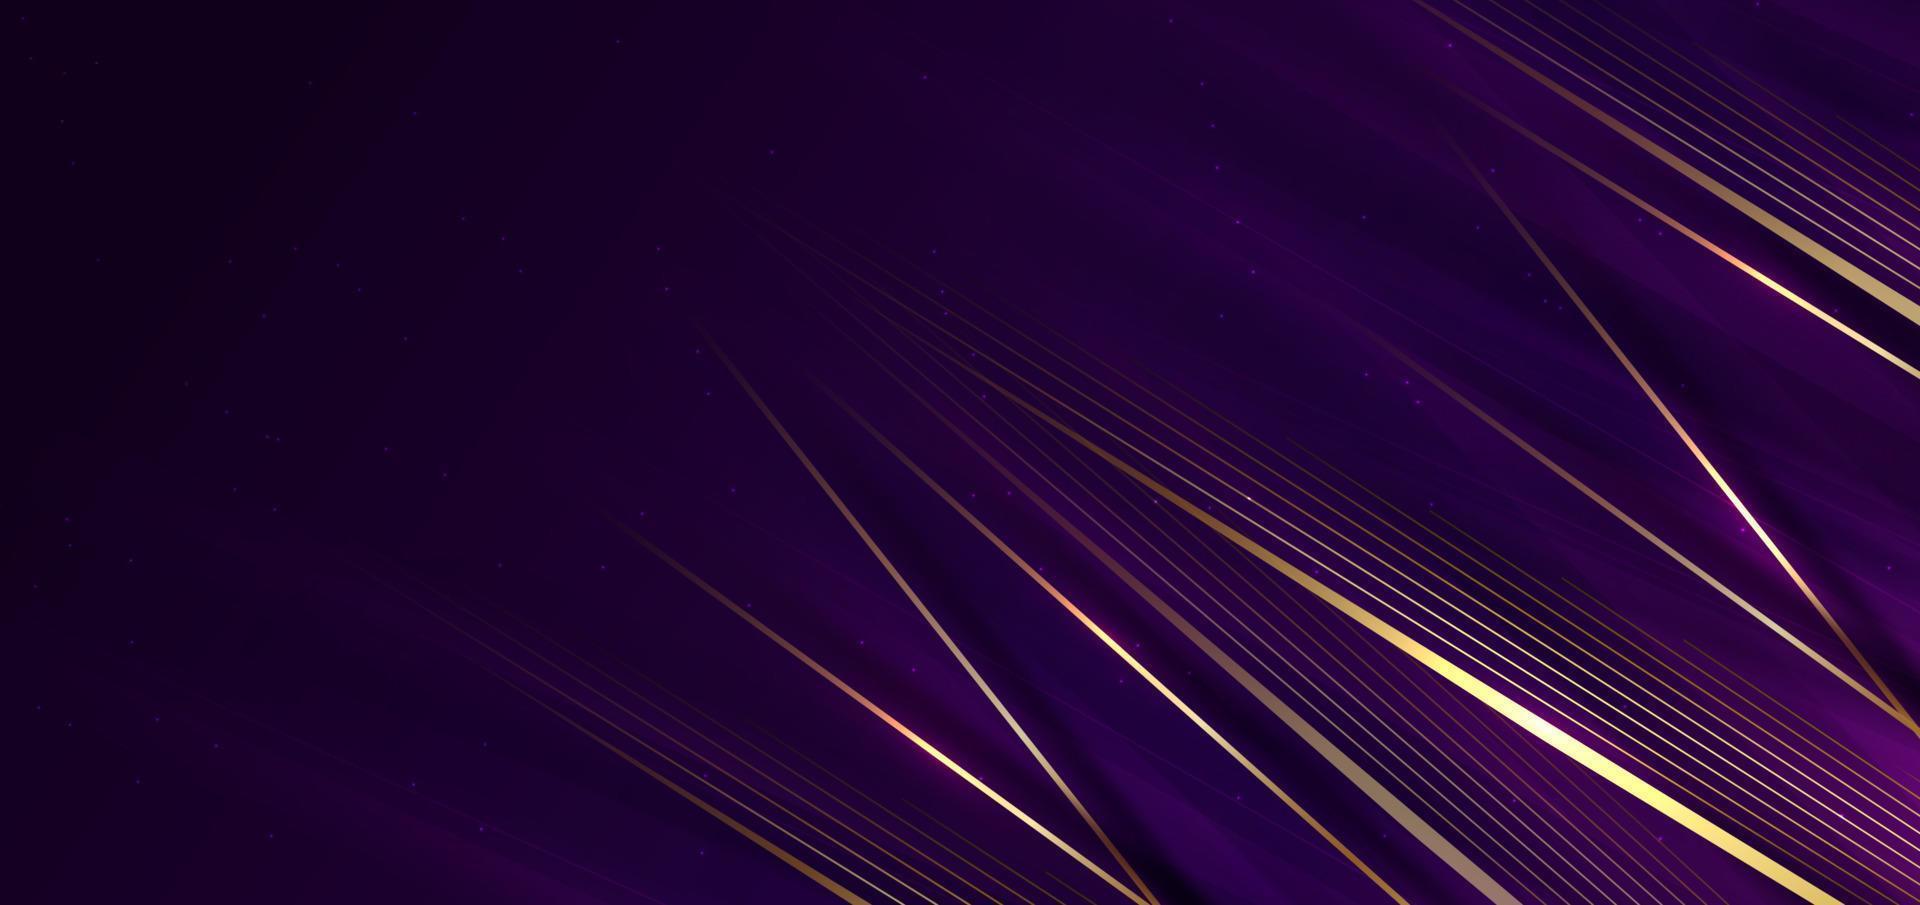 Abstract elegant purple background with golden line and lighting effect sparkle. Luxury template award design. vector